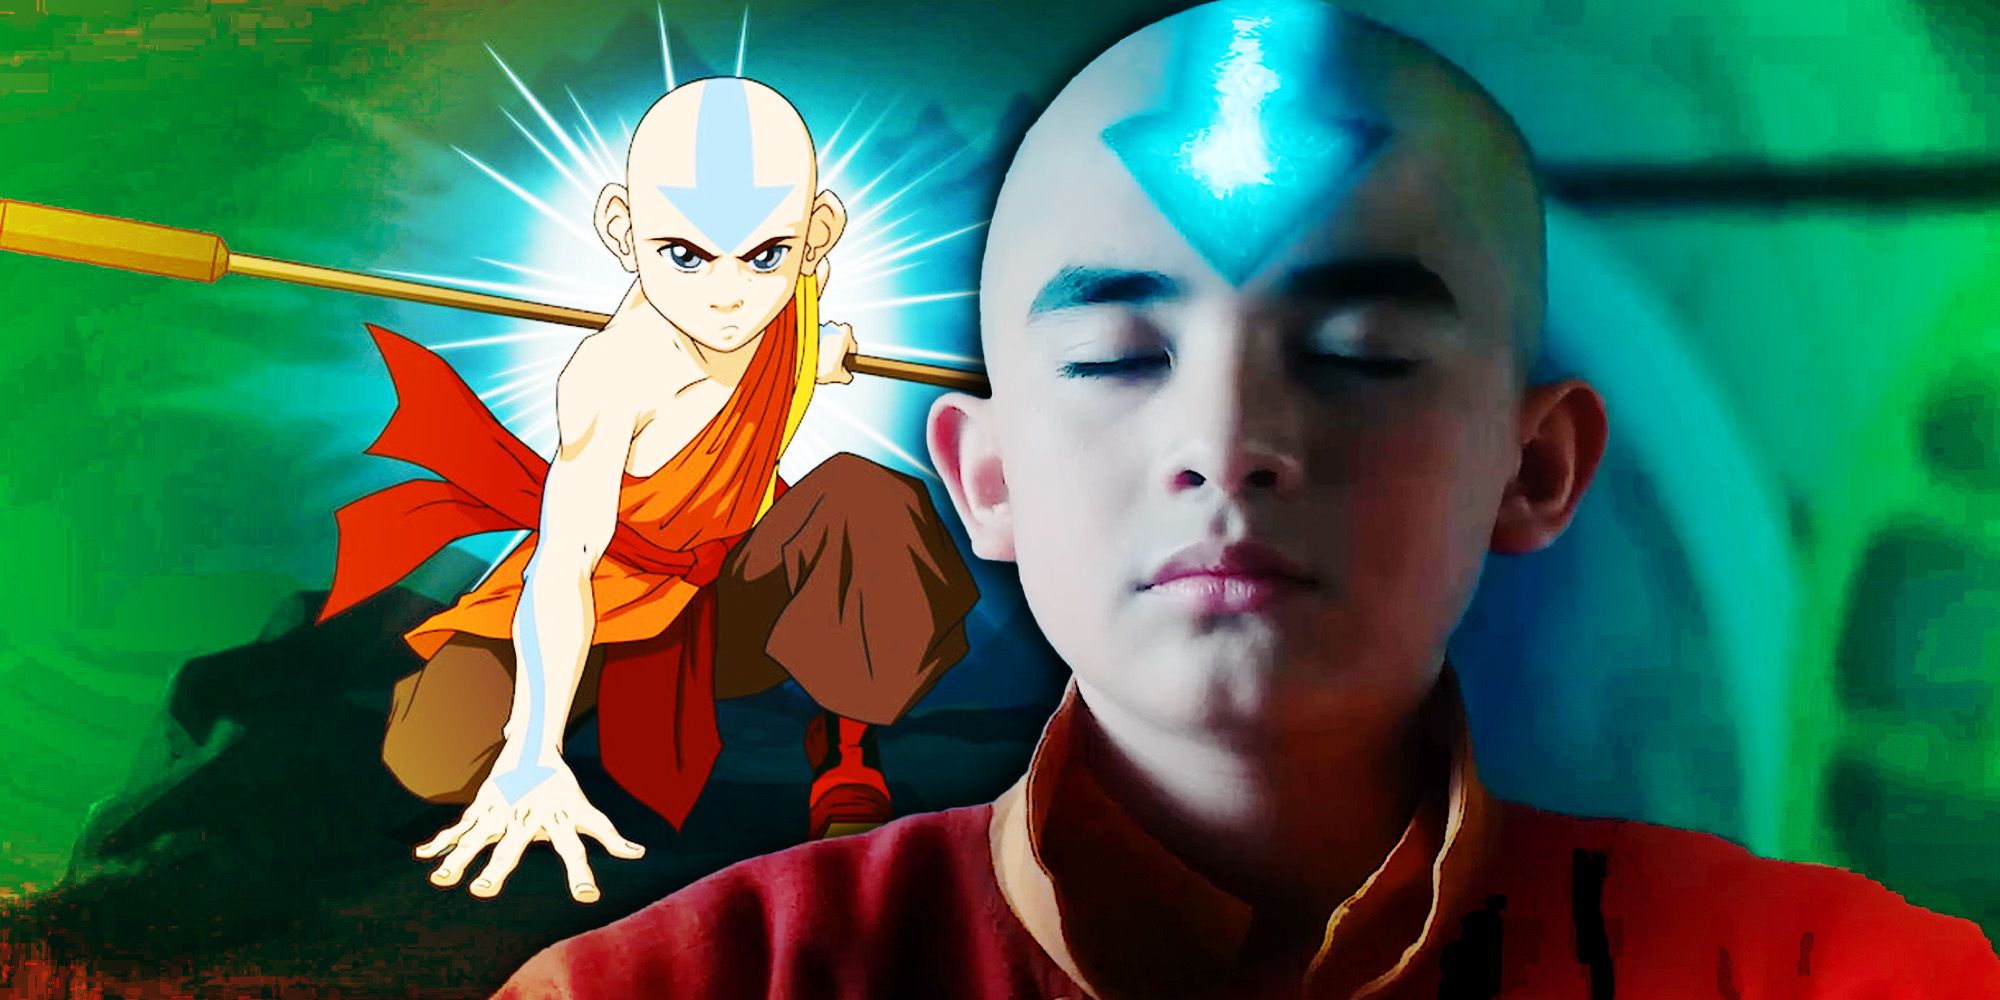 The Live-Action Format Of Netflix's The Last Airbender Risks Ruining ...